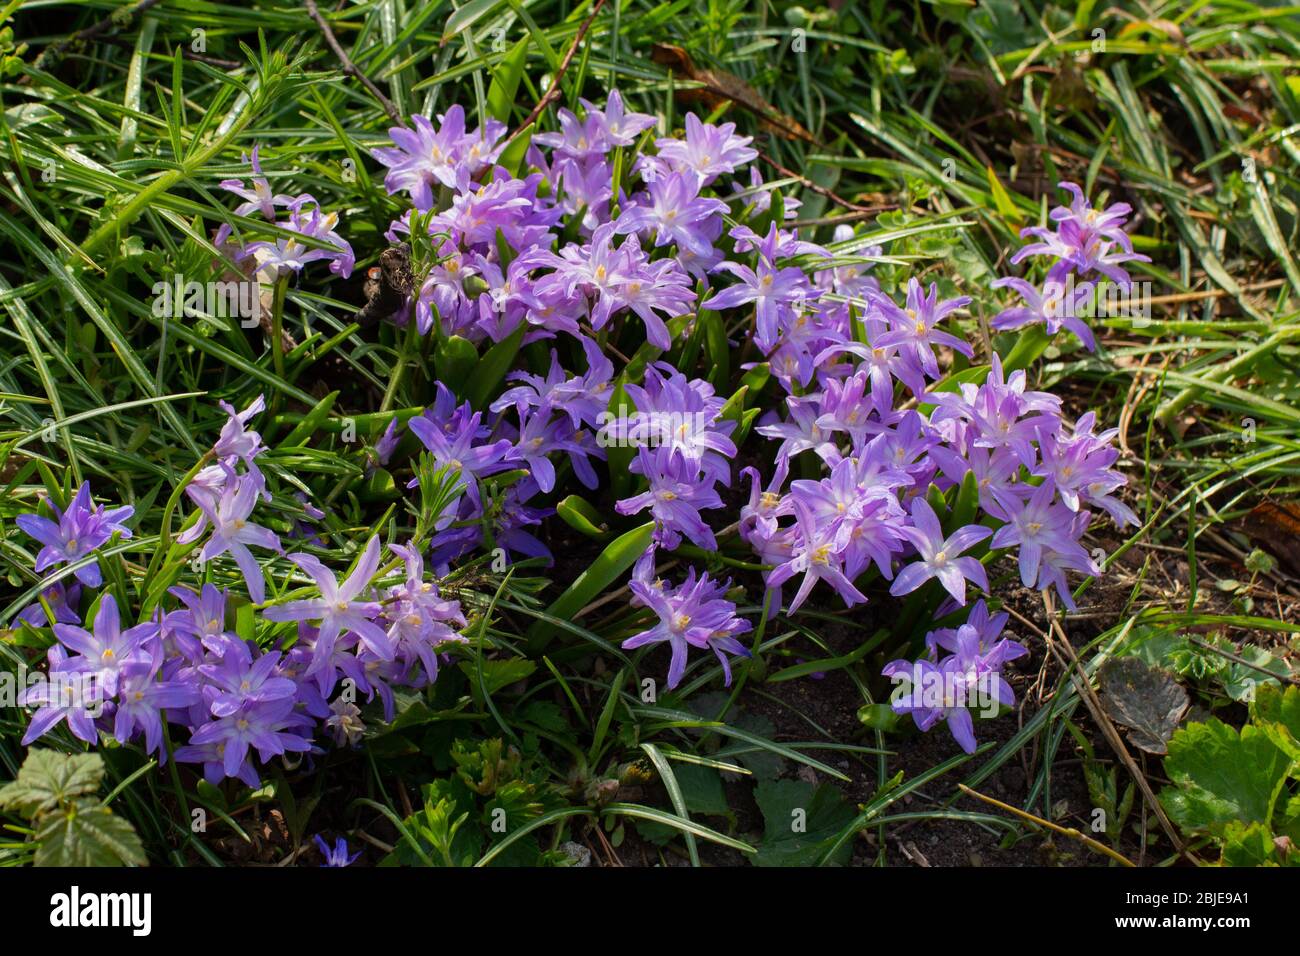 Flowers of a Lucile's Glory-of-the-snow, Chionodoxa luciliae or Gewöhnliche Sternhyazinthe Stock Photo